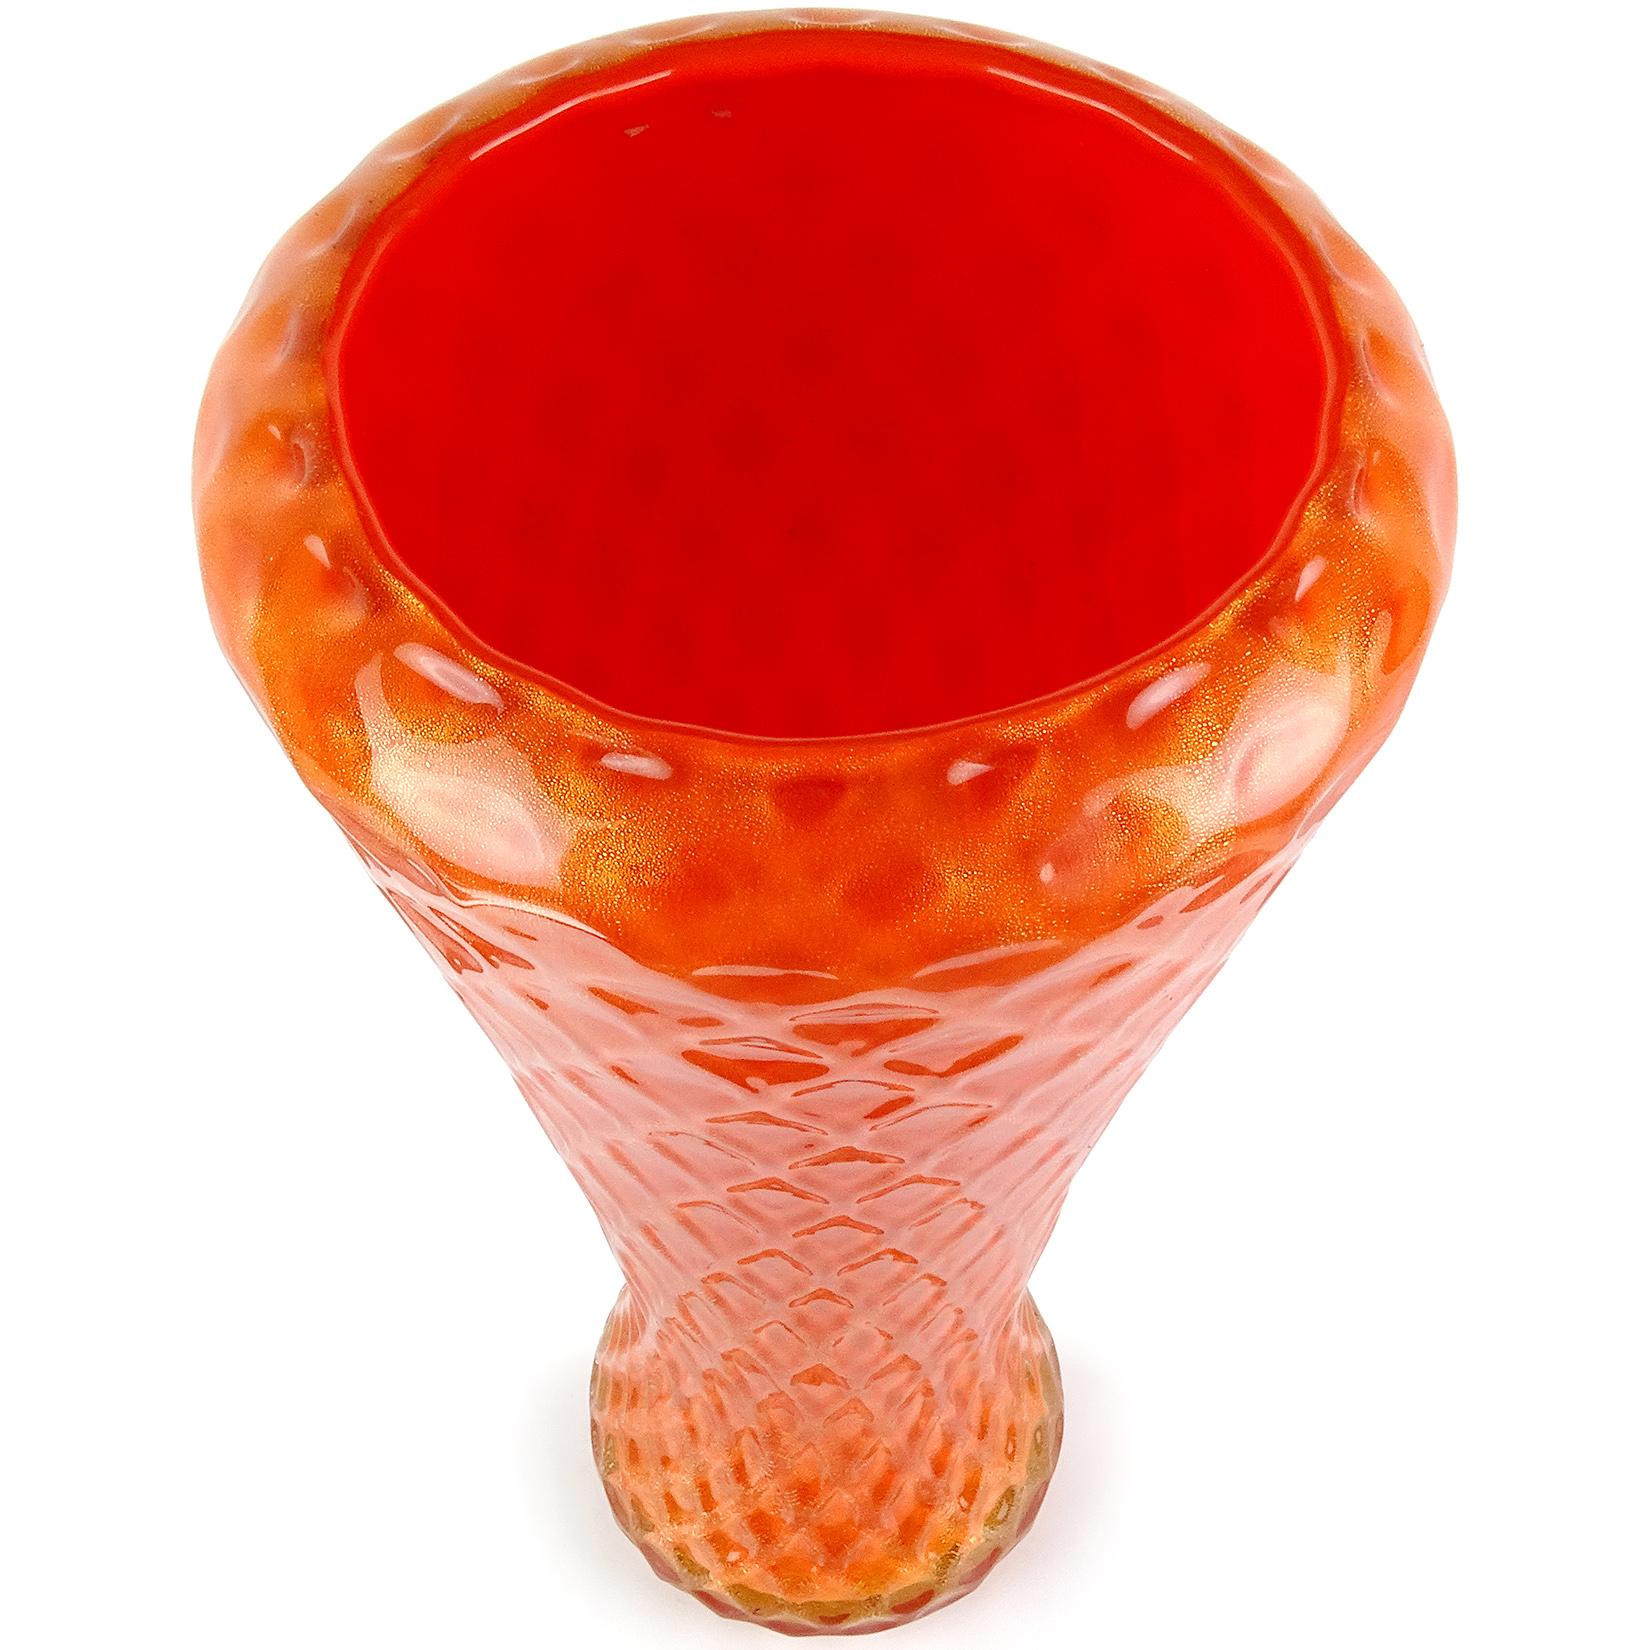 Beautiful large vintage Murano hand blown orange and gold flecks, diamond quilted surface Italian art glass flower vase. Attributed to designer Alfredo Barbini, circa 1950s. The vase is profusely covered in gold leaf throughout the surface. You can